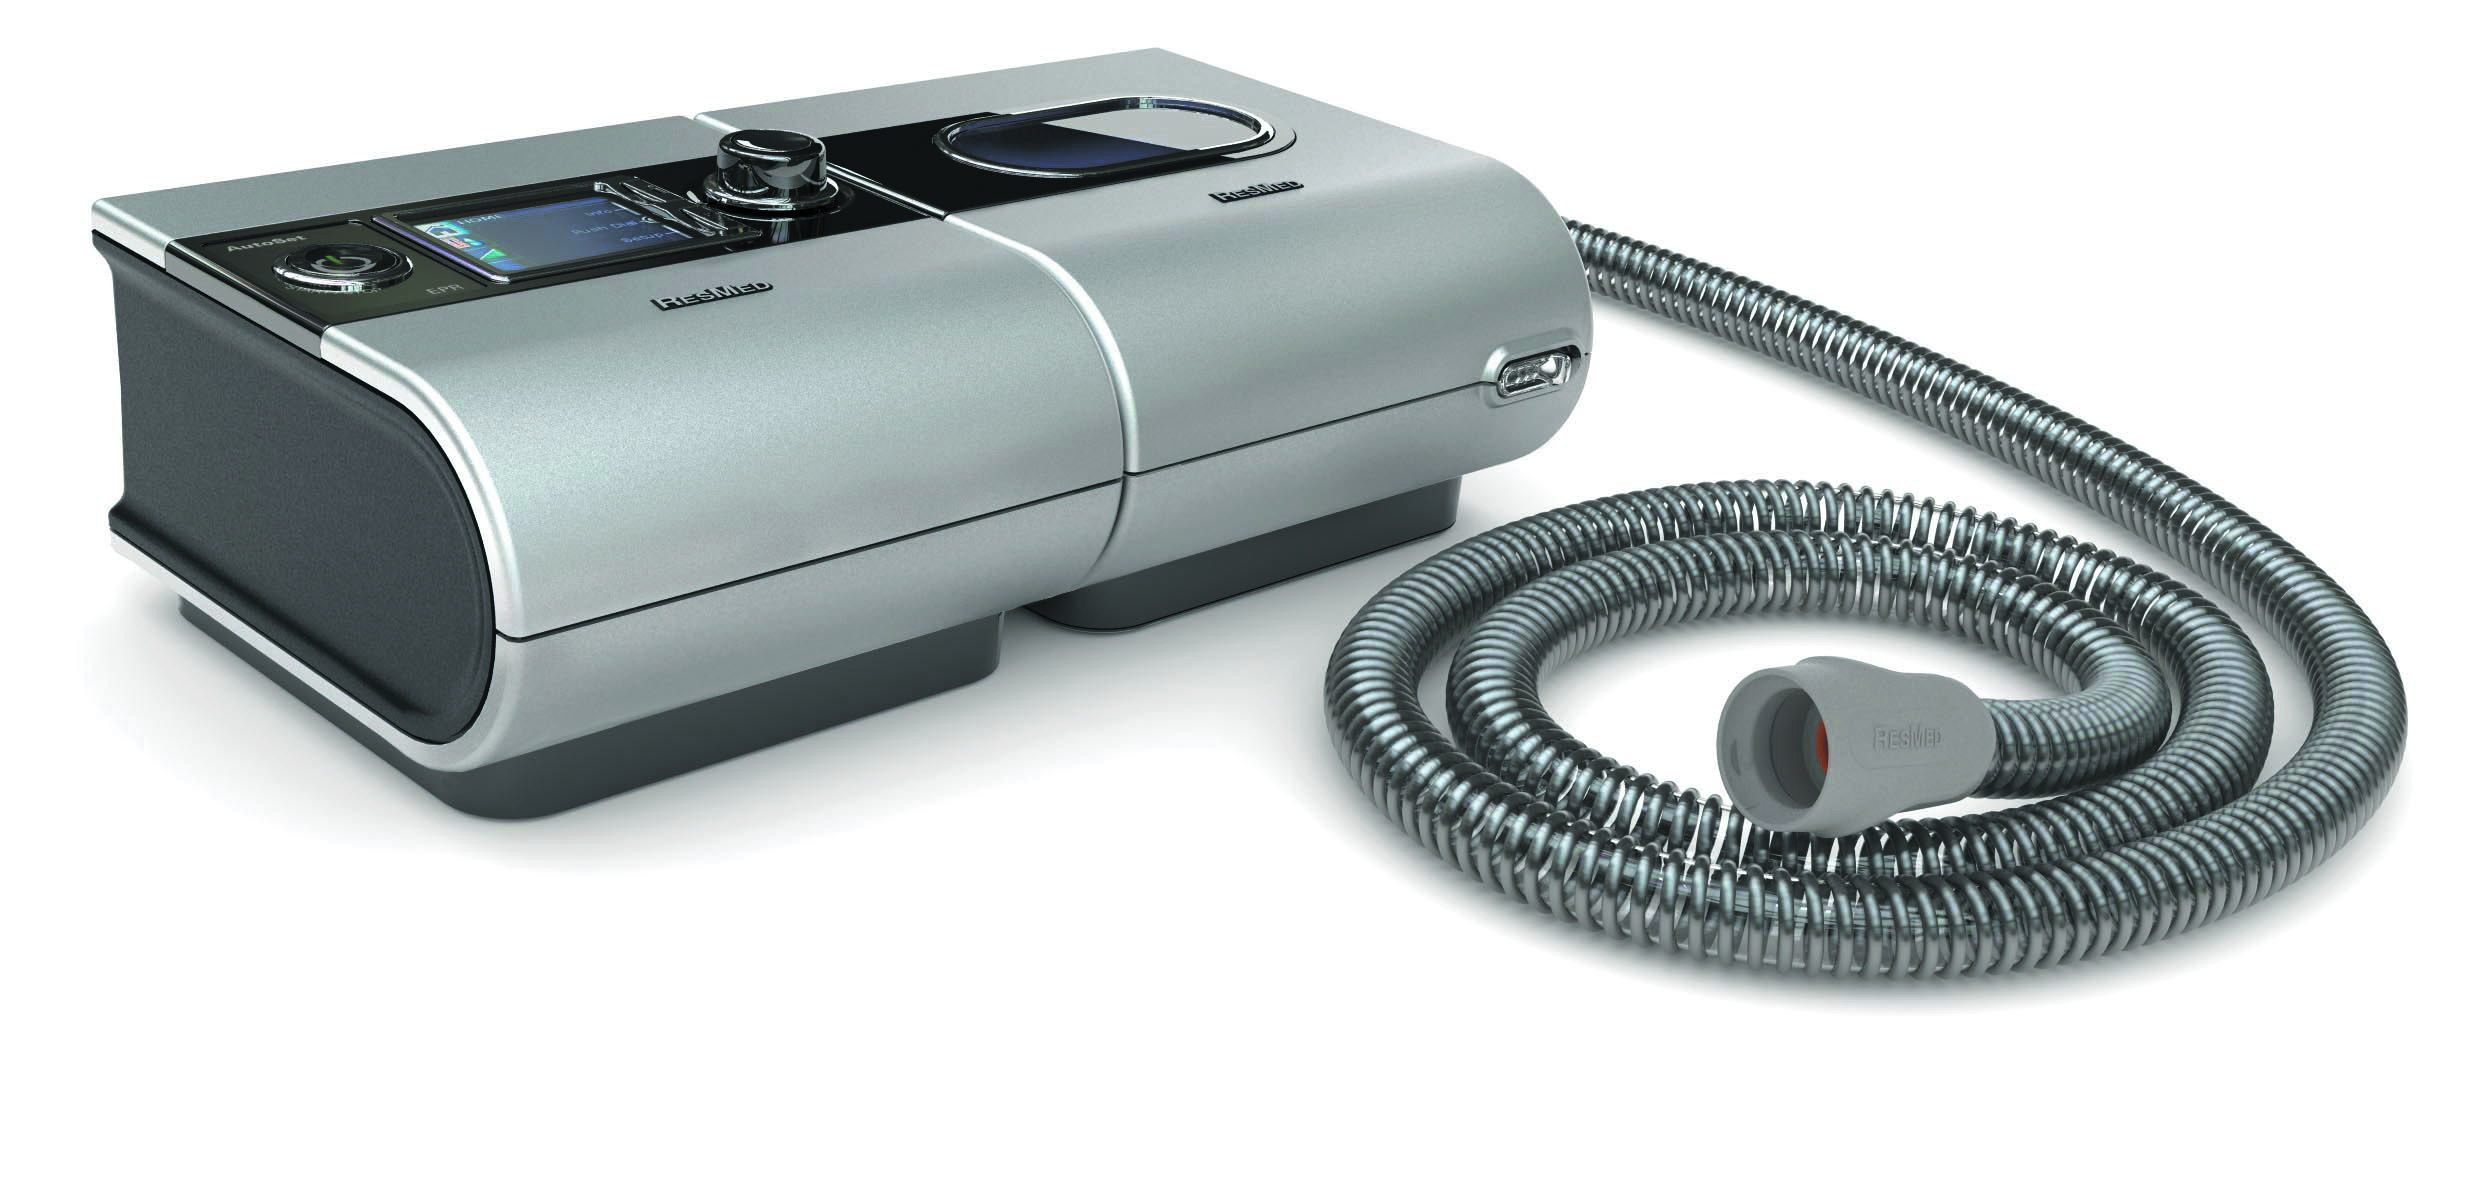 resmed-climate-line-tubing-with-s9-cpap